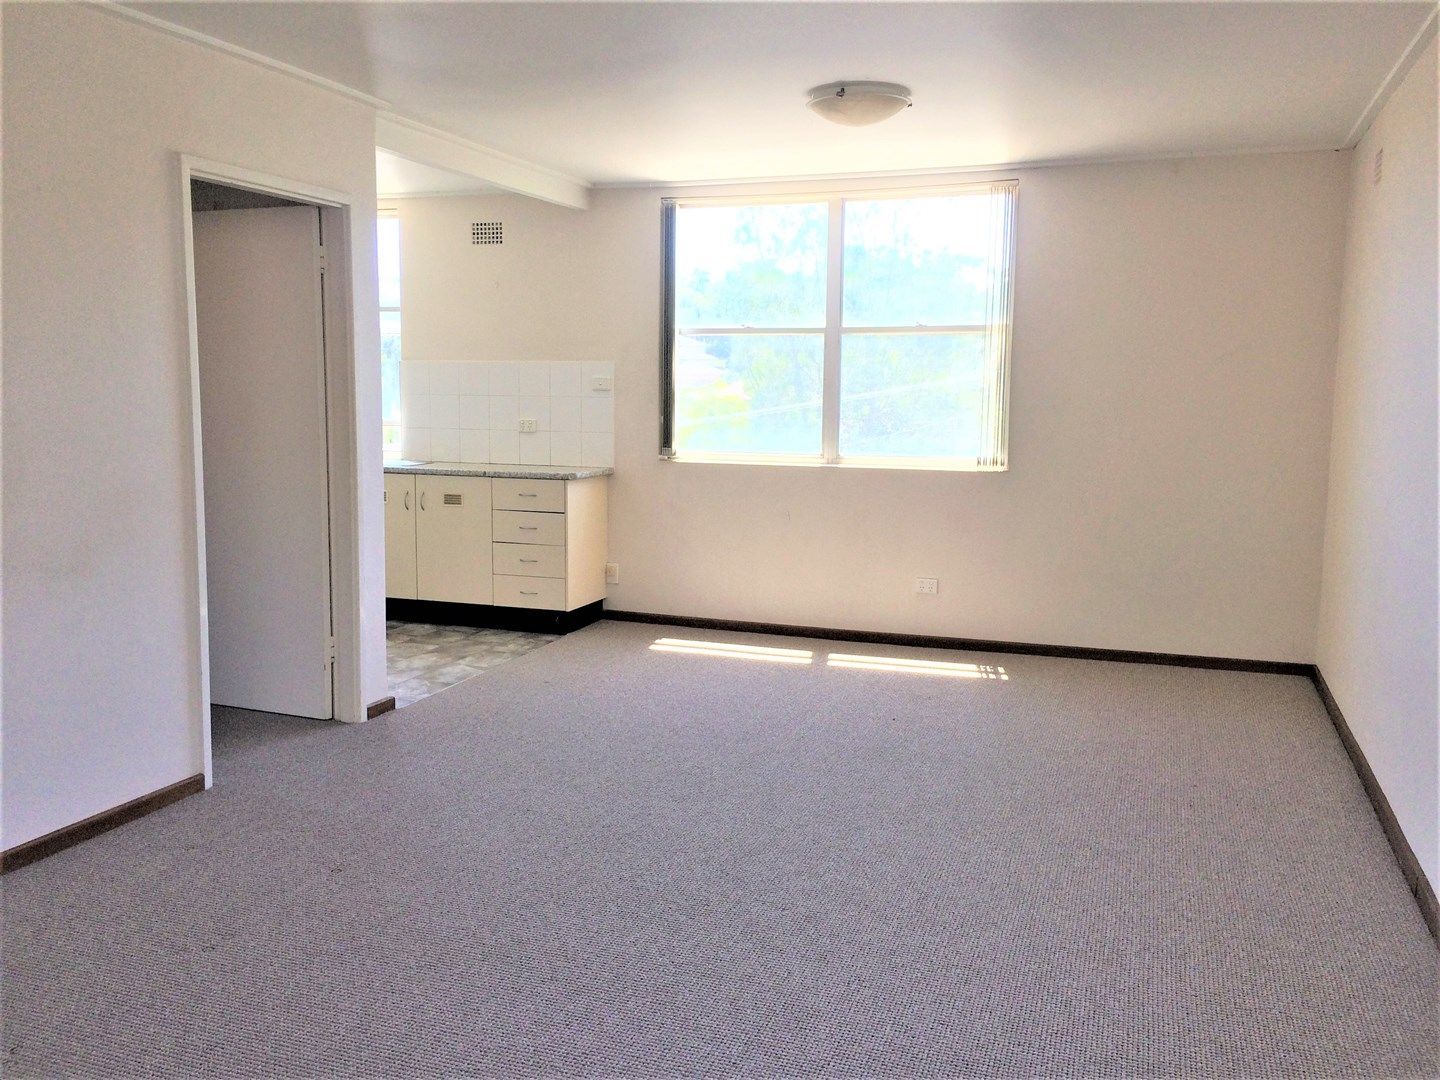 3/34 Swan Street, The Hill NSW 2300, Image 0